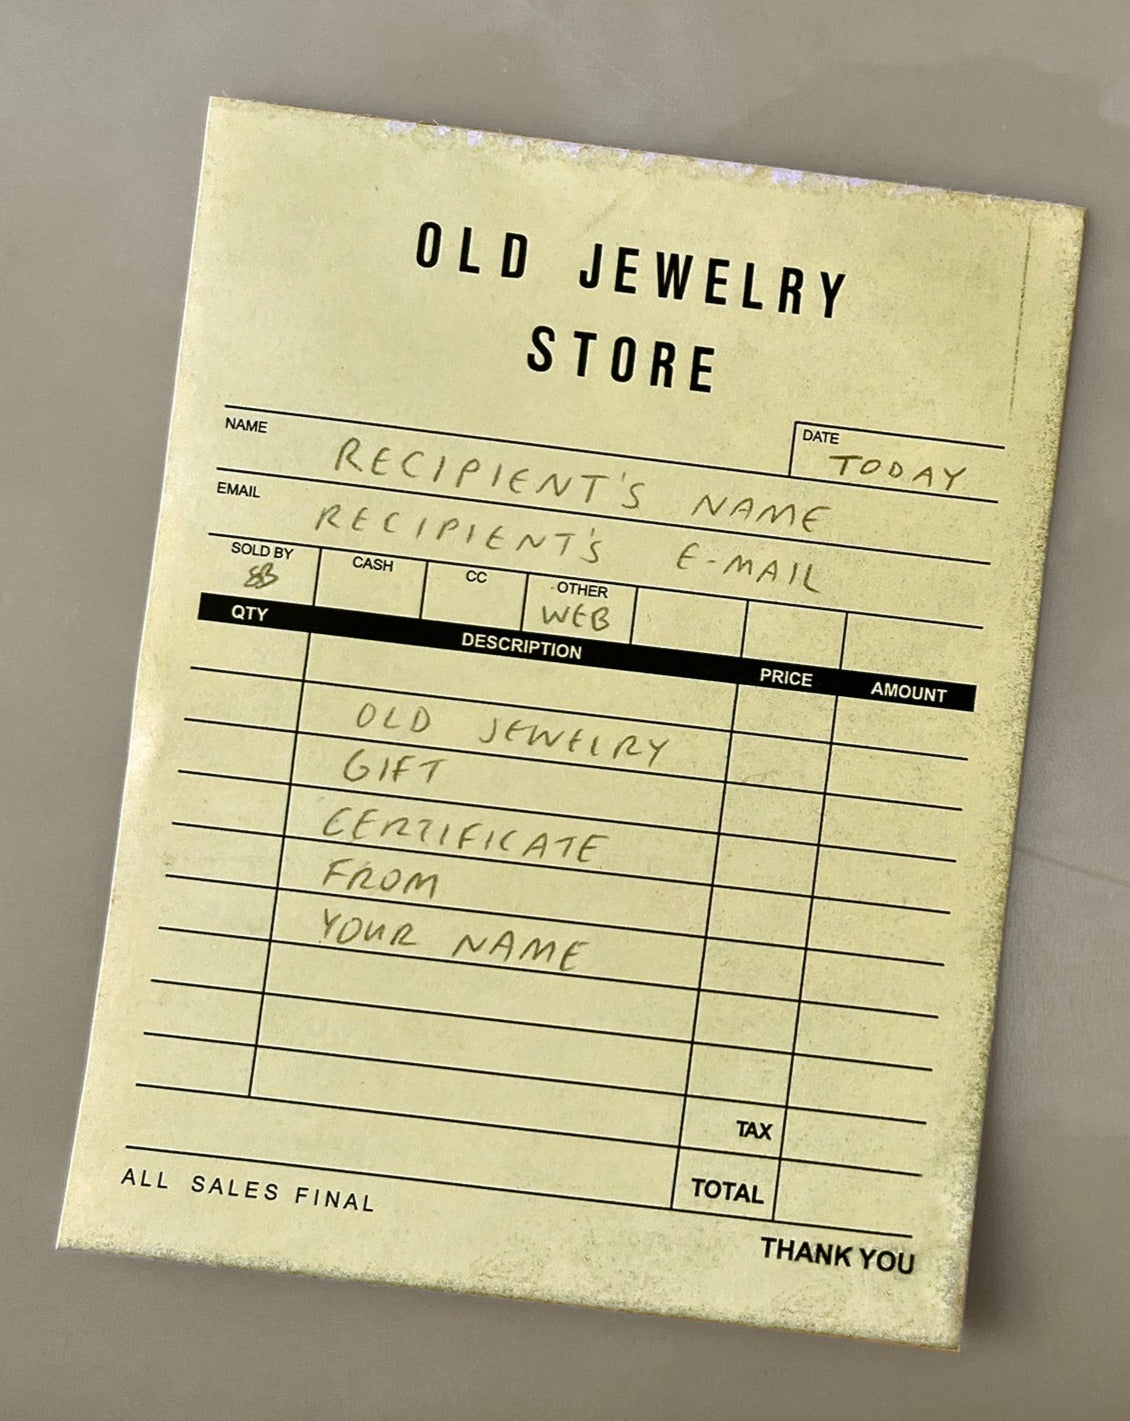 OLD JEWELRY gift certificate